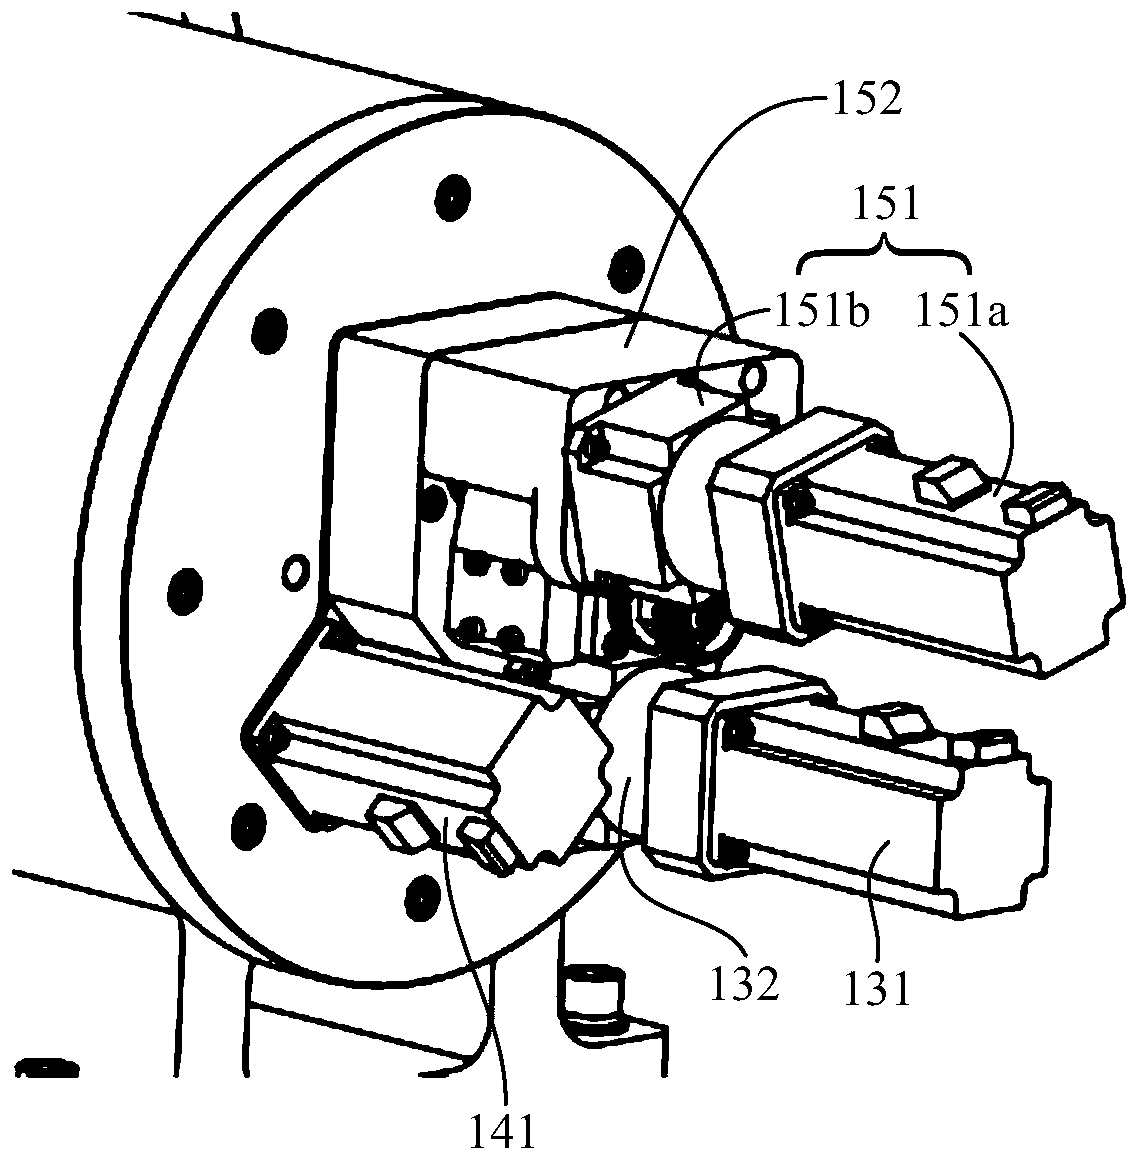 A low-pressure turbine installation device and its use method